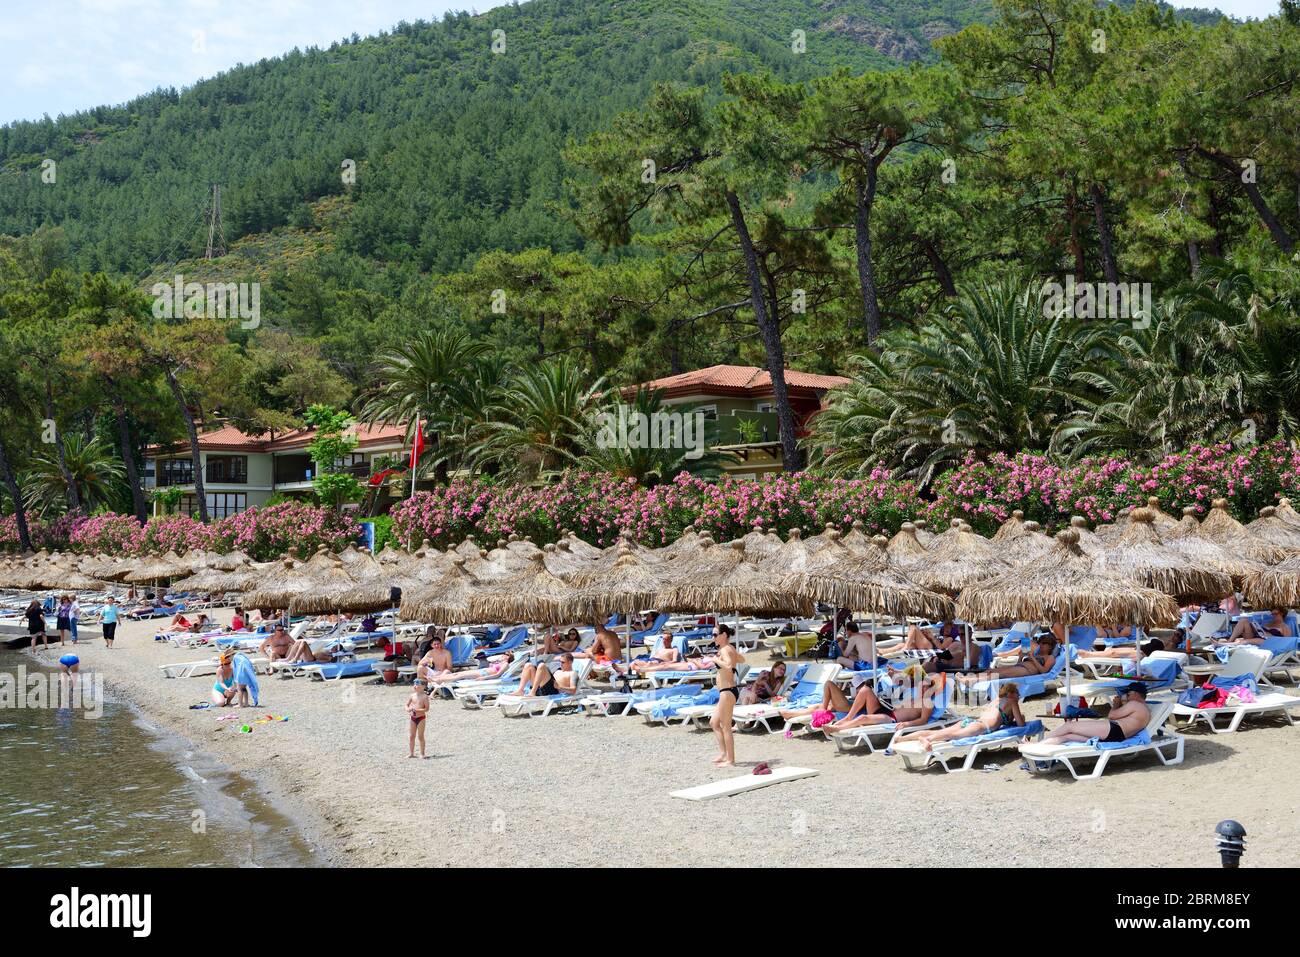 MARMARIS, TURKEY - MAY 18: The tourists enjoing their vacation in luxury hotel on May 18, 2013 in Marmaris, Turkey. More then 36 mln tourists have vis Stock Photo